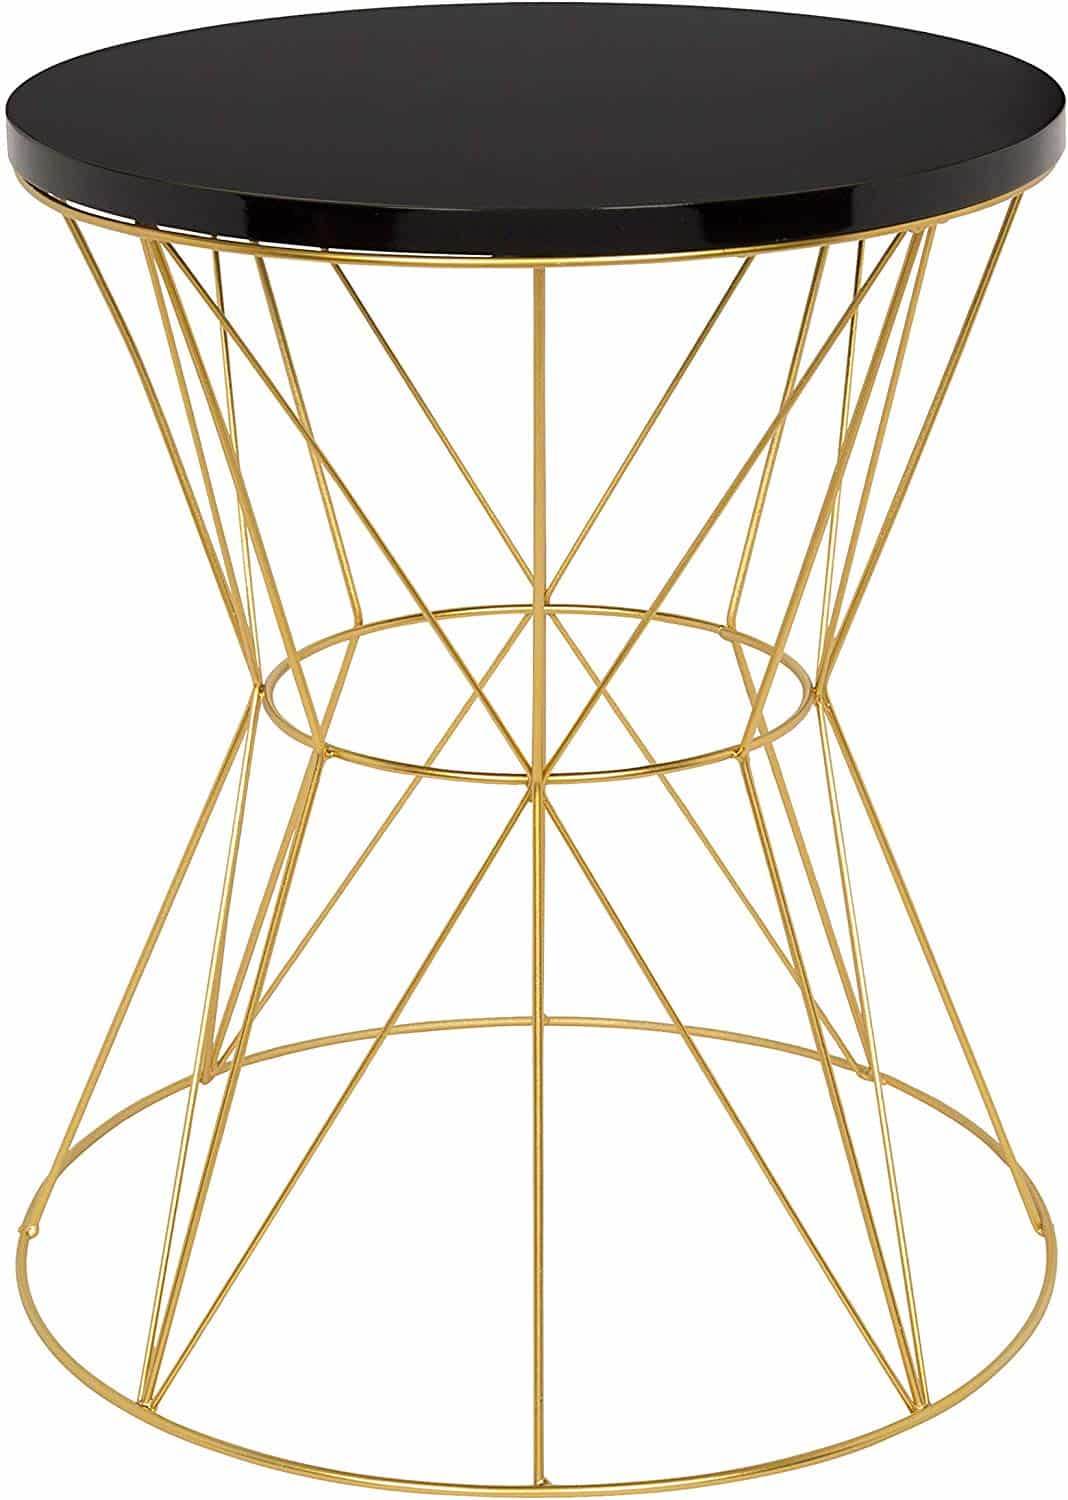 Wired gold and black side table